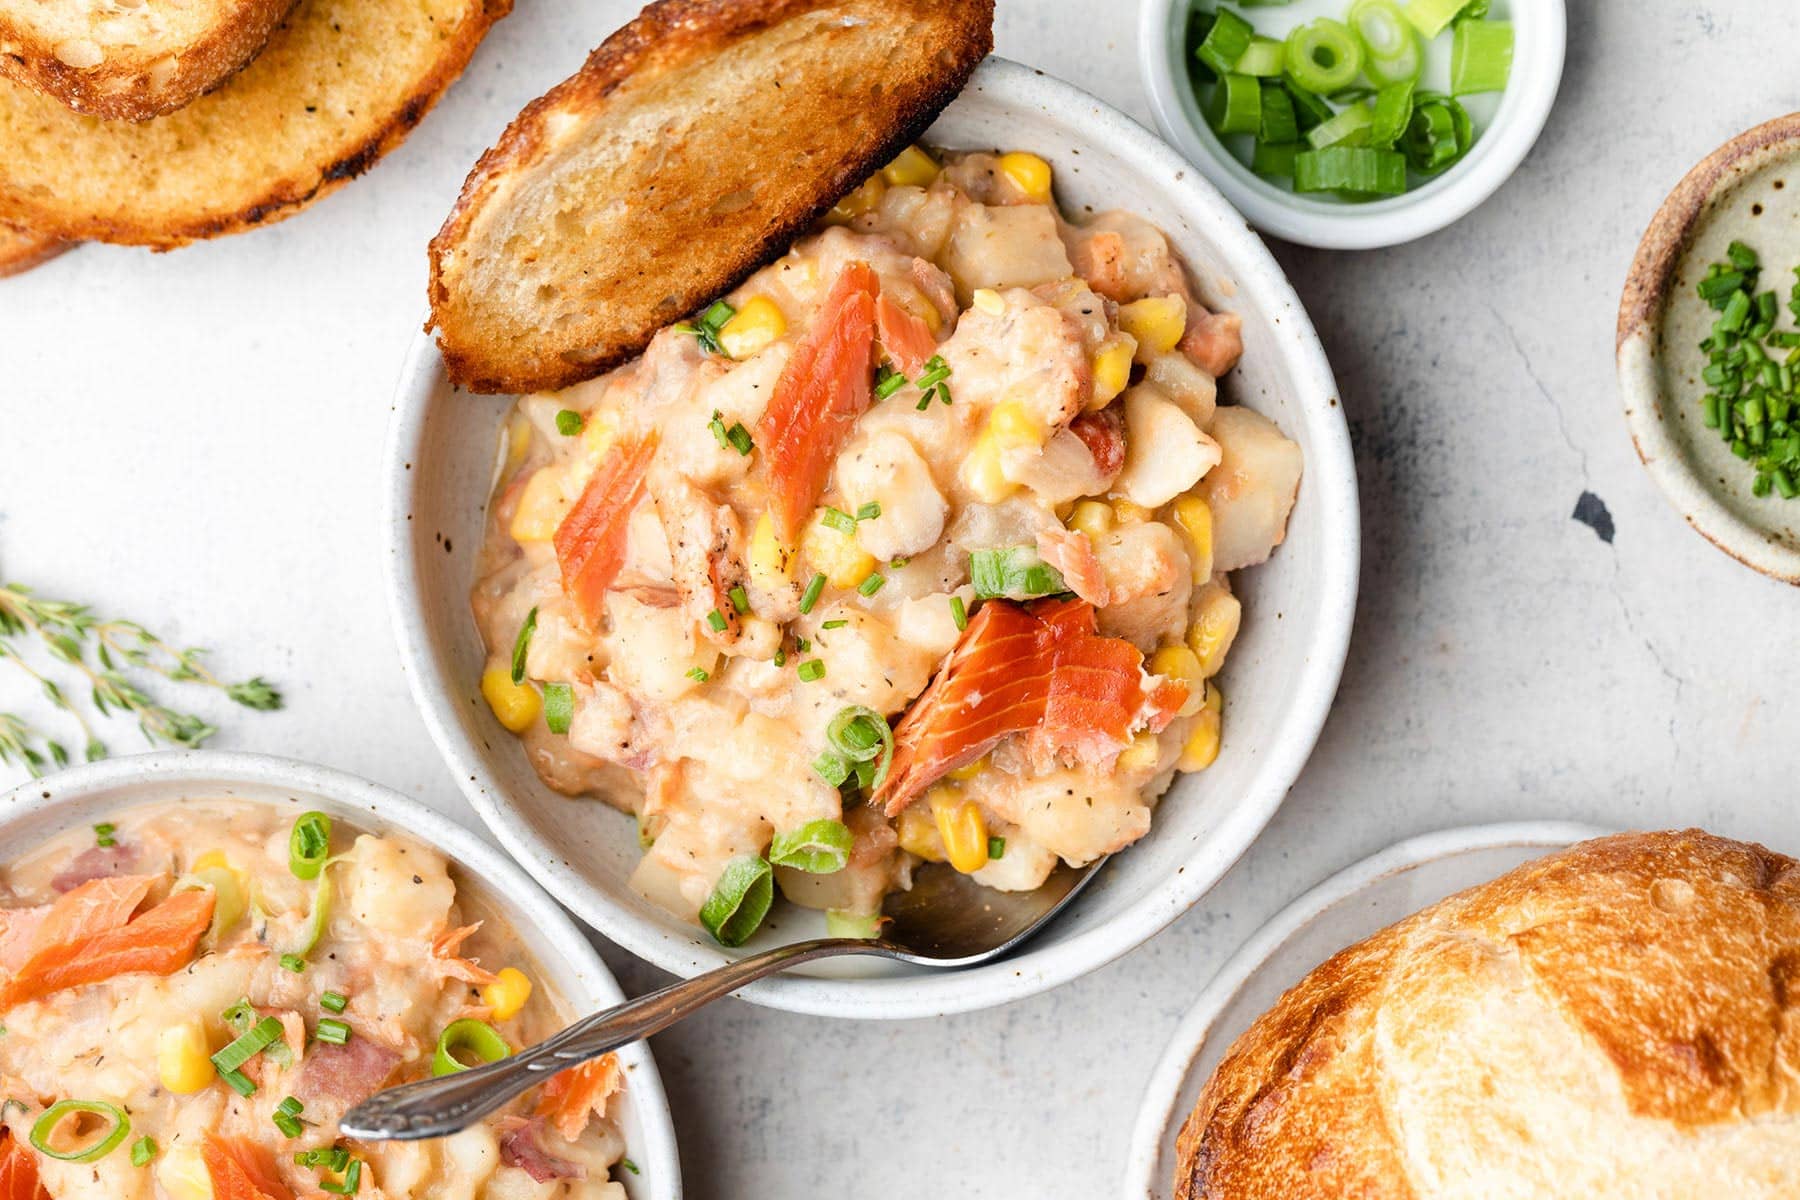 Smoked salmon corn chowder in bowls and bread on the side.